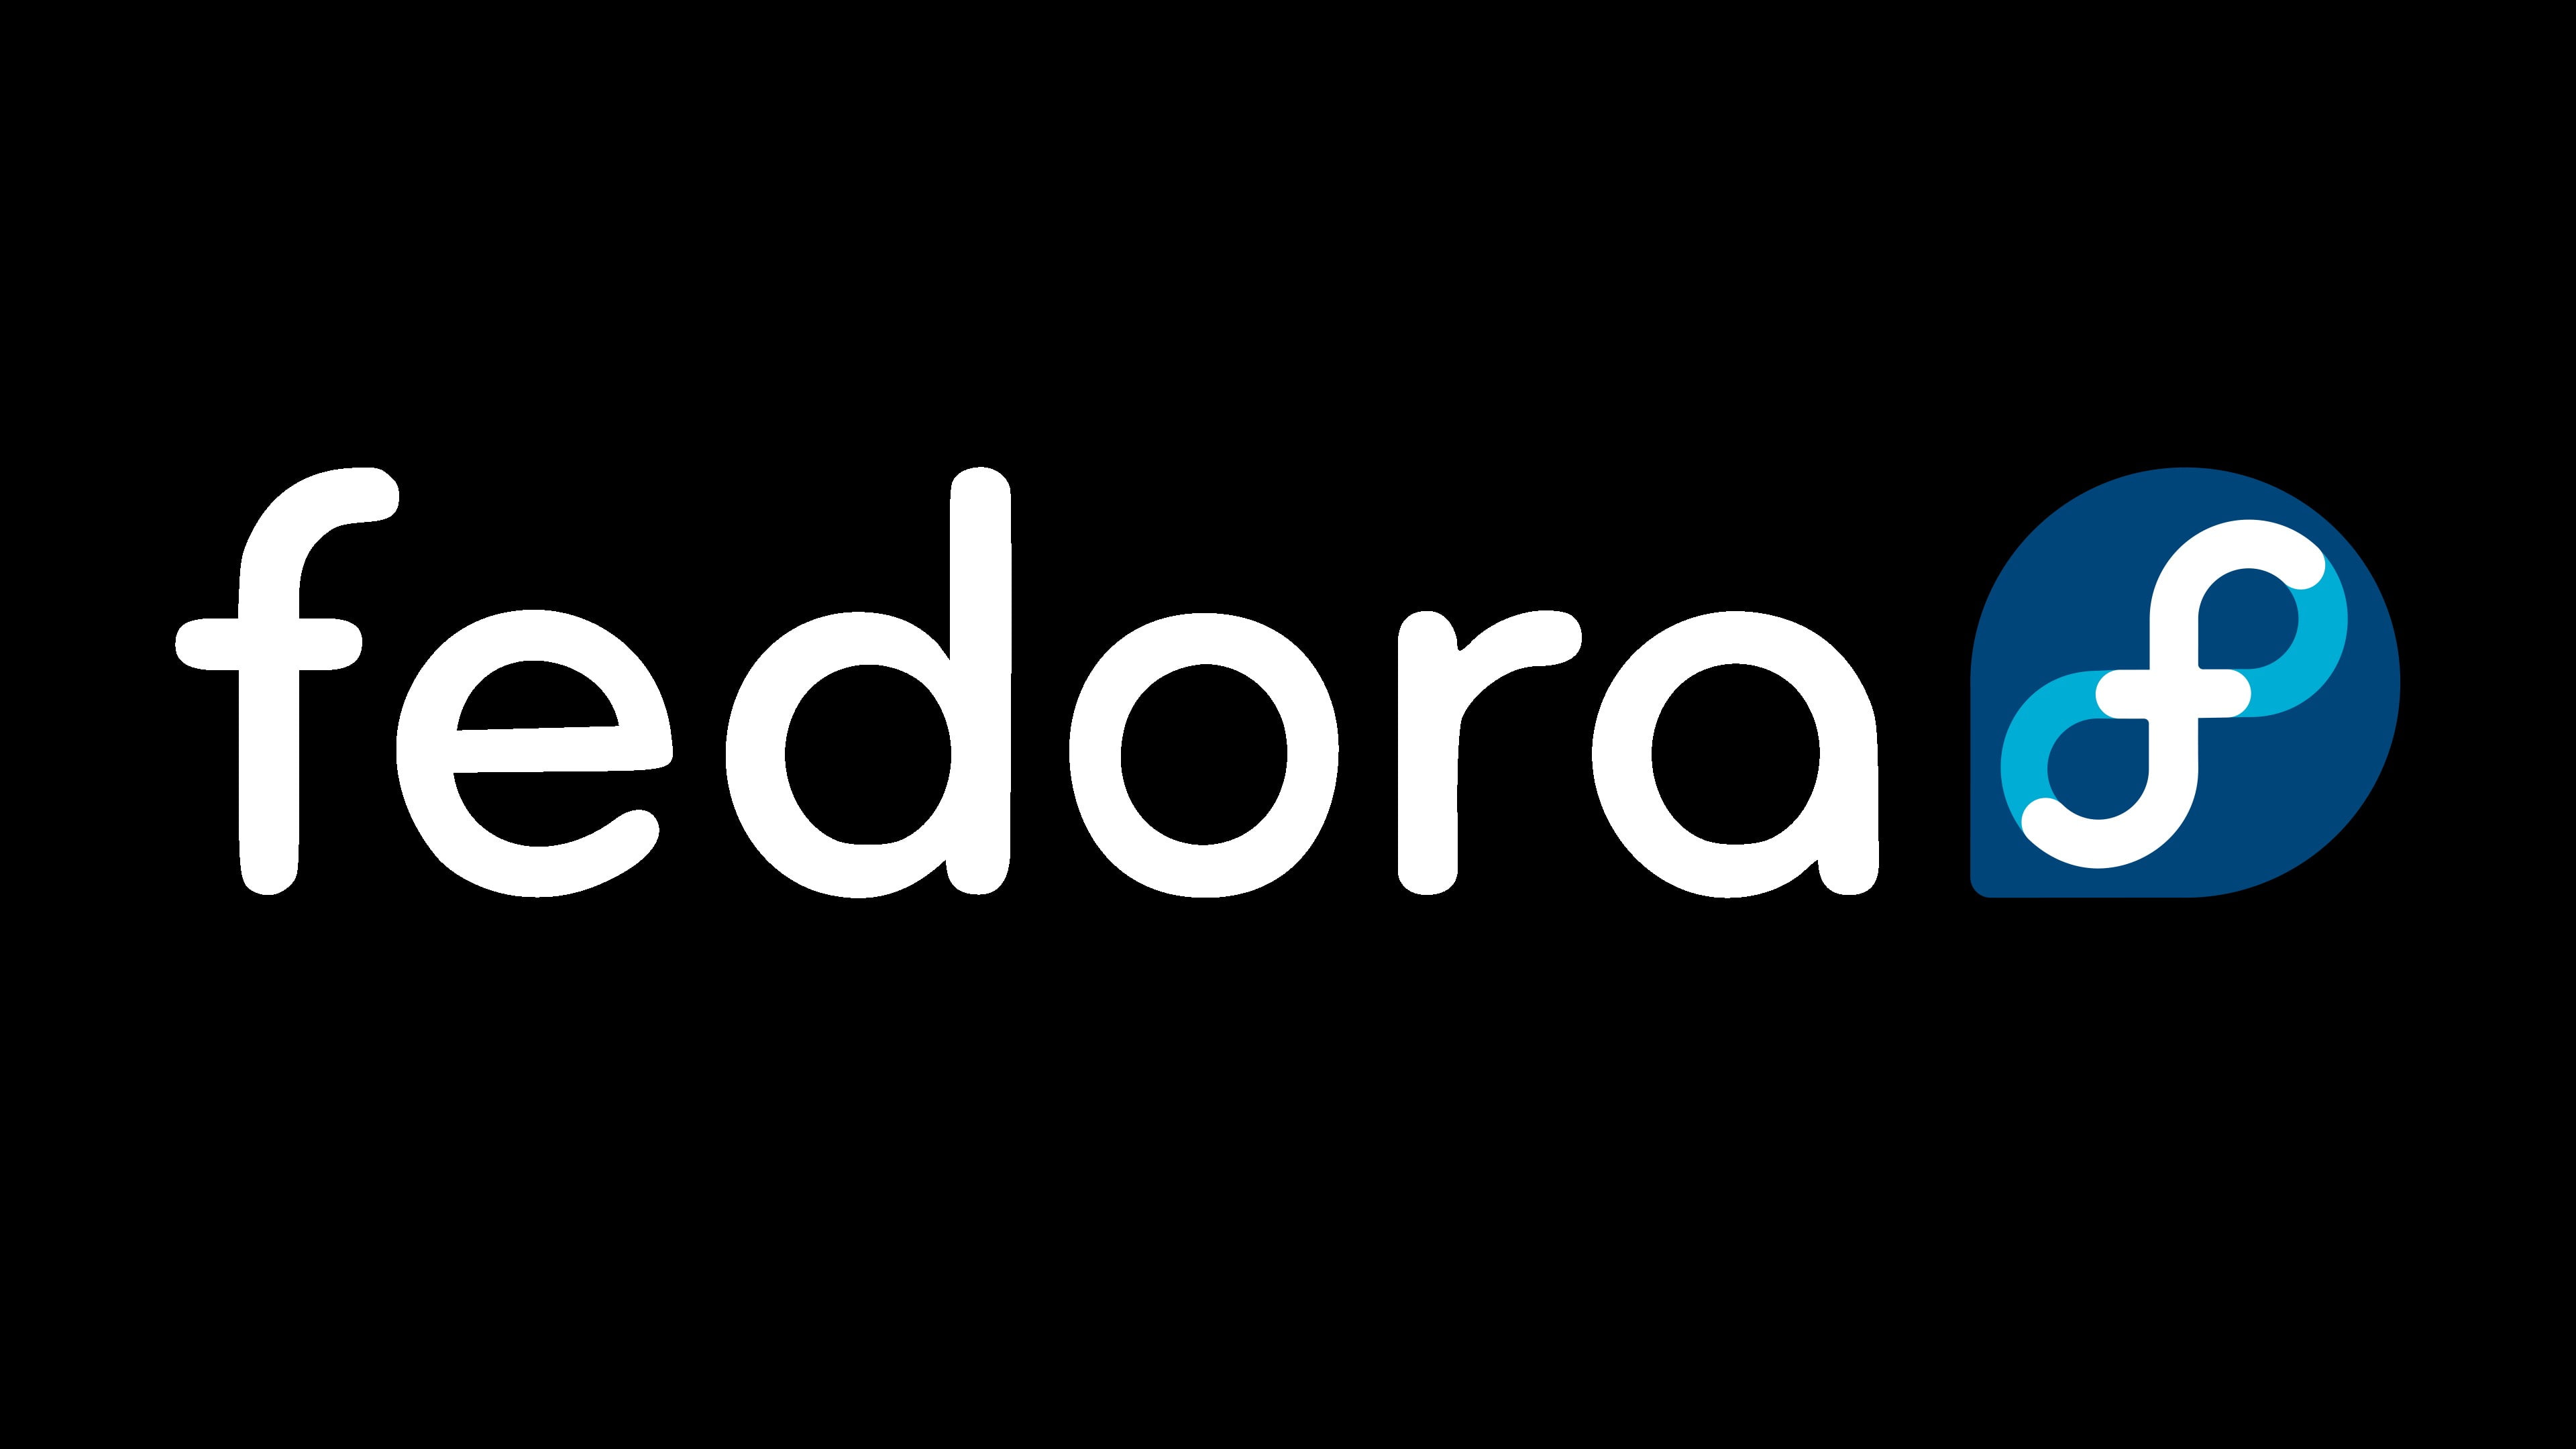 fedora linux open source open source operating system logo red hat brand